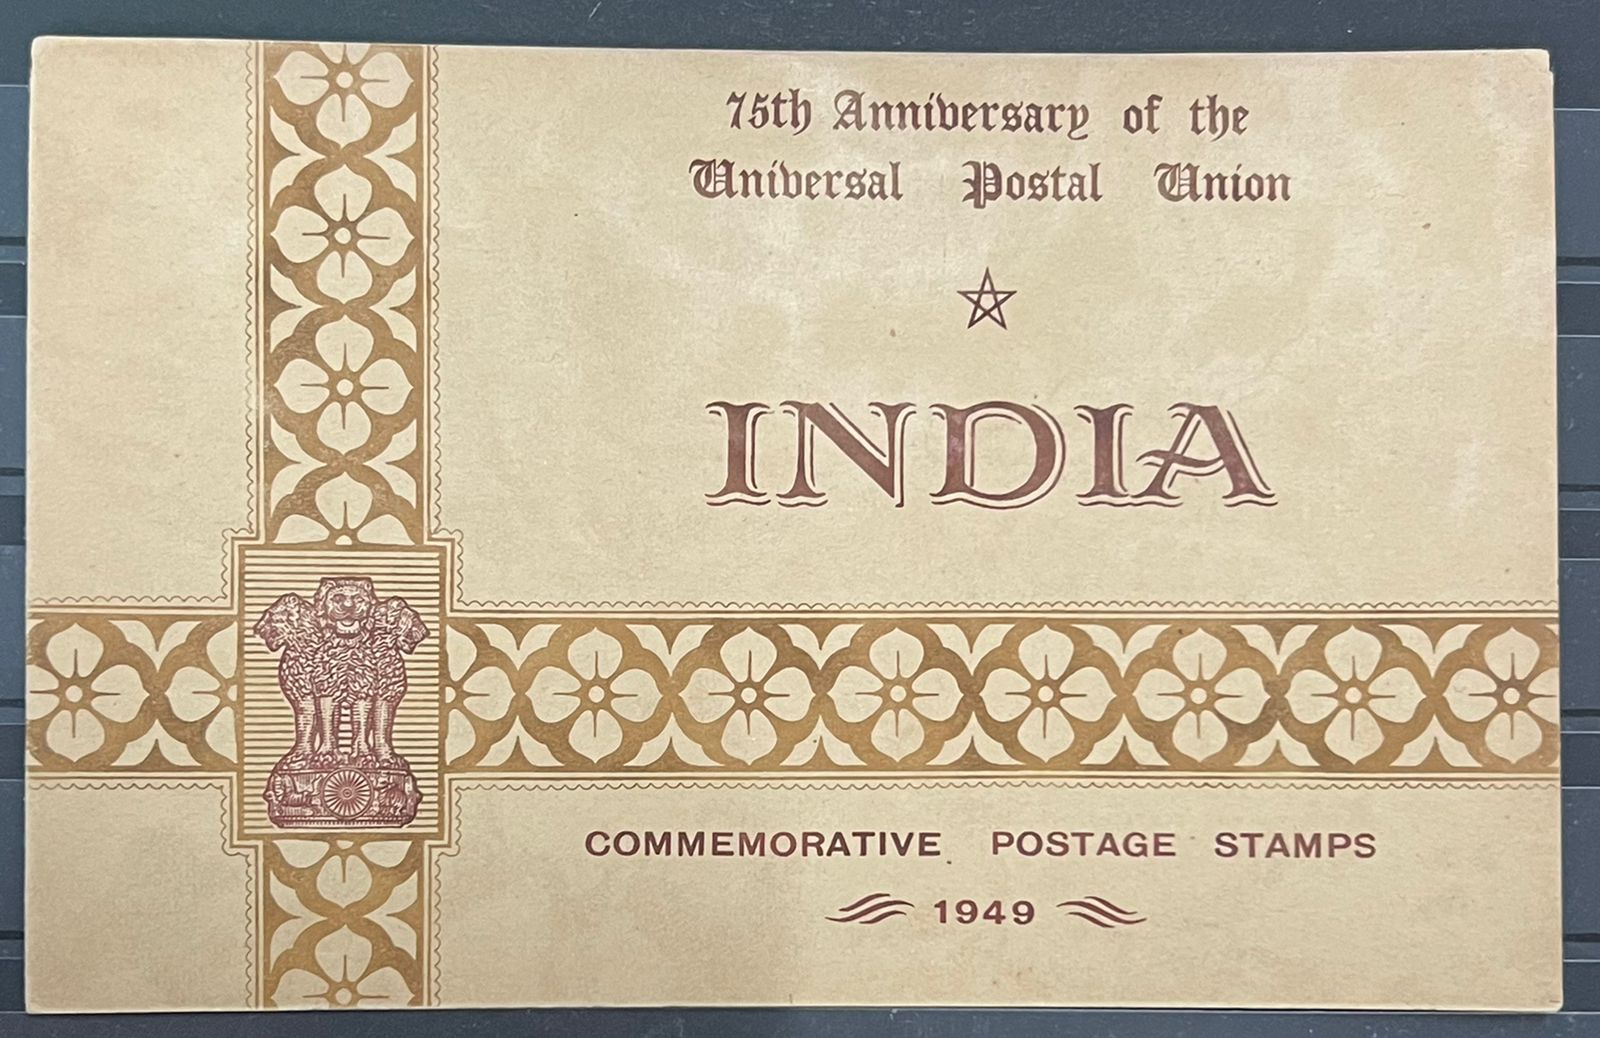 India 1949 UPU MNH Set in VIP Folder Very Rare.. Cat Value of Mint Set is 4000/- This is VIP Folder!